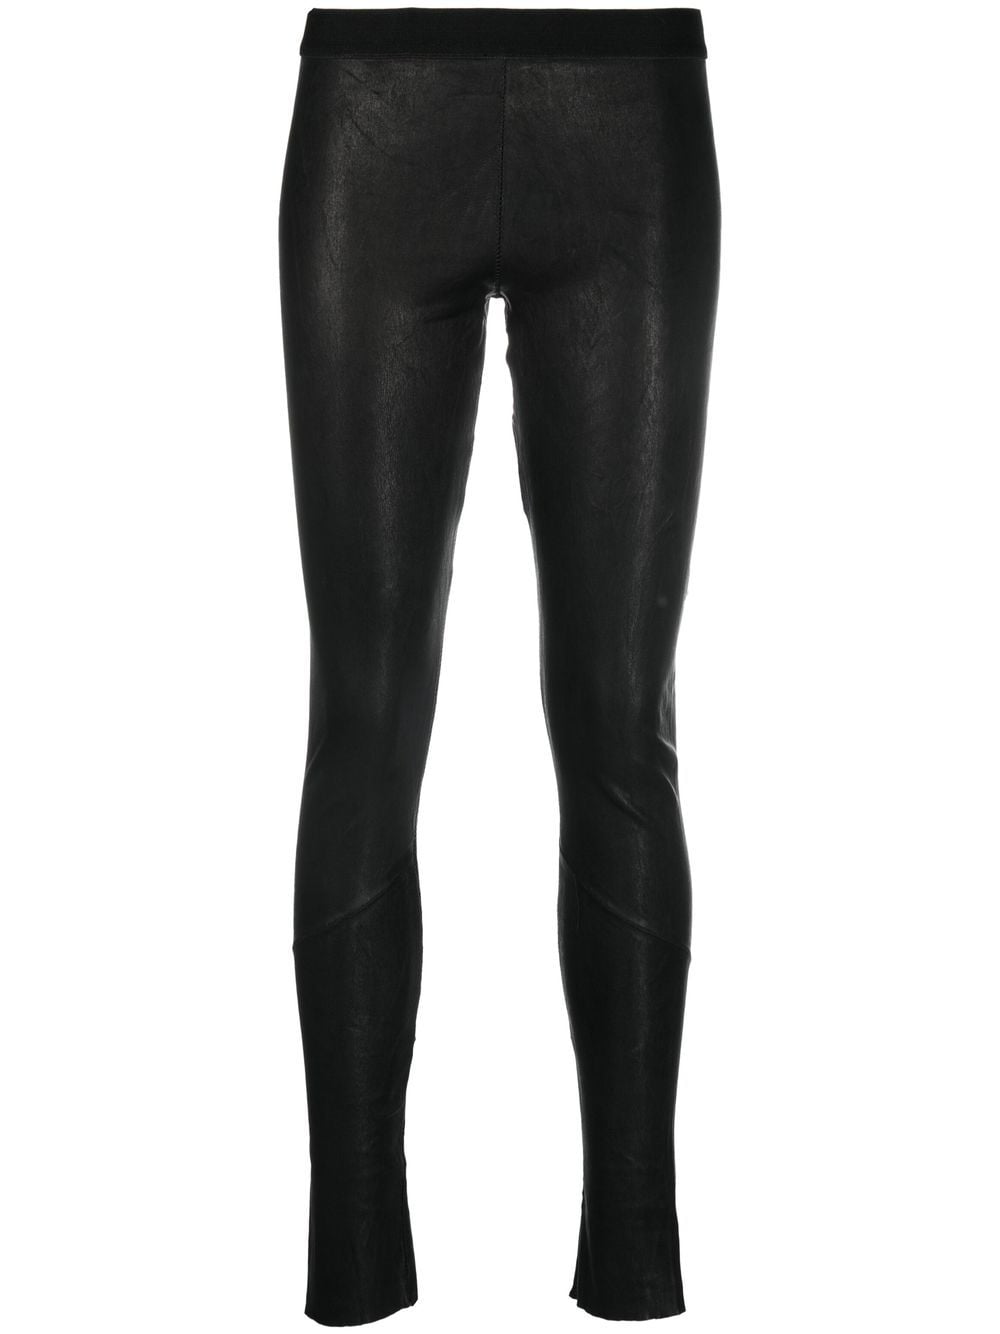 Isaac Sellam Experience low-rise leather leggings - Black